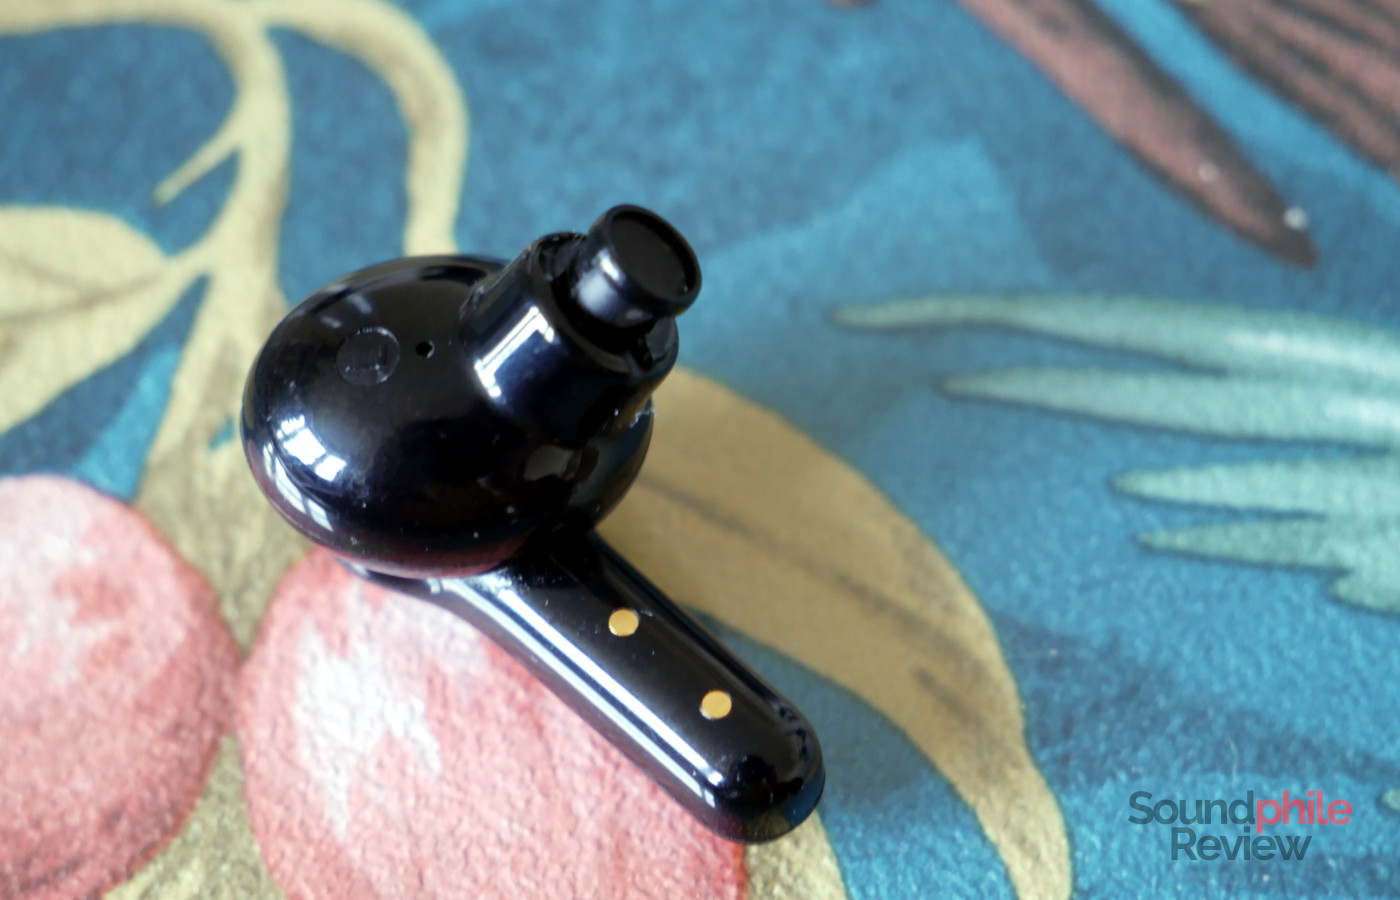 QCY T13 review: The new best ultra-cheap earbuds